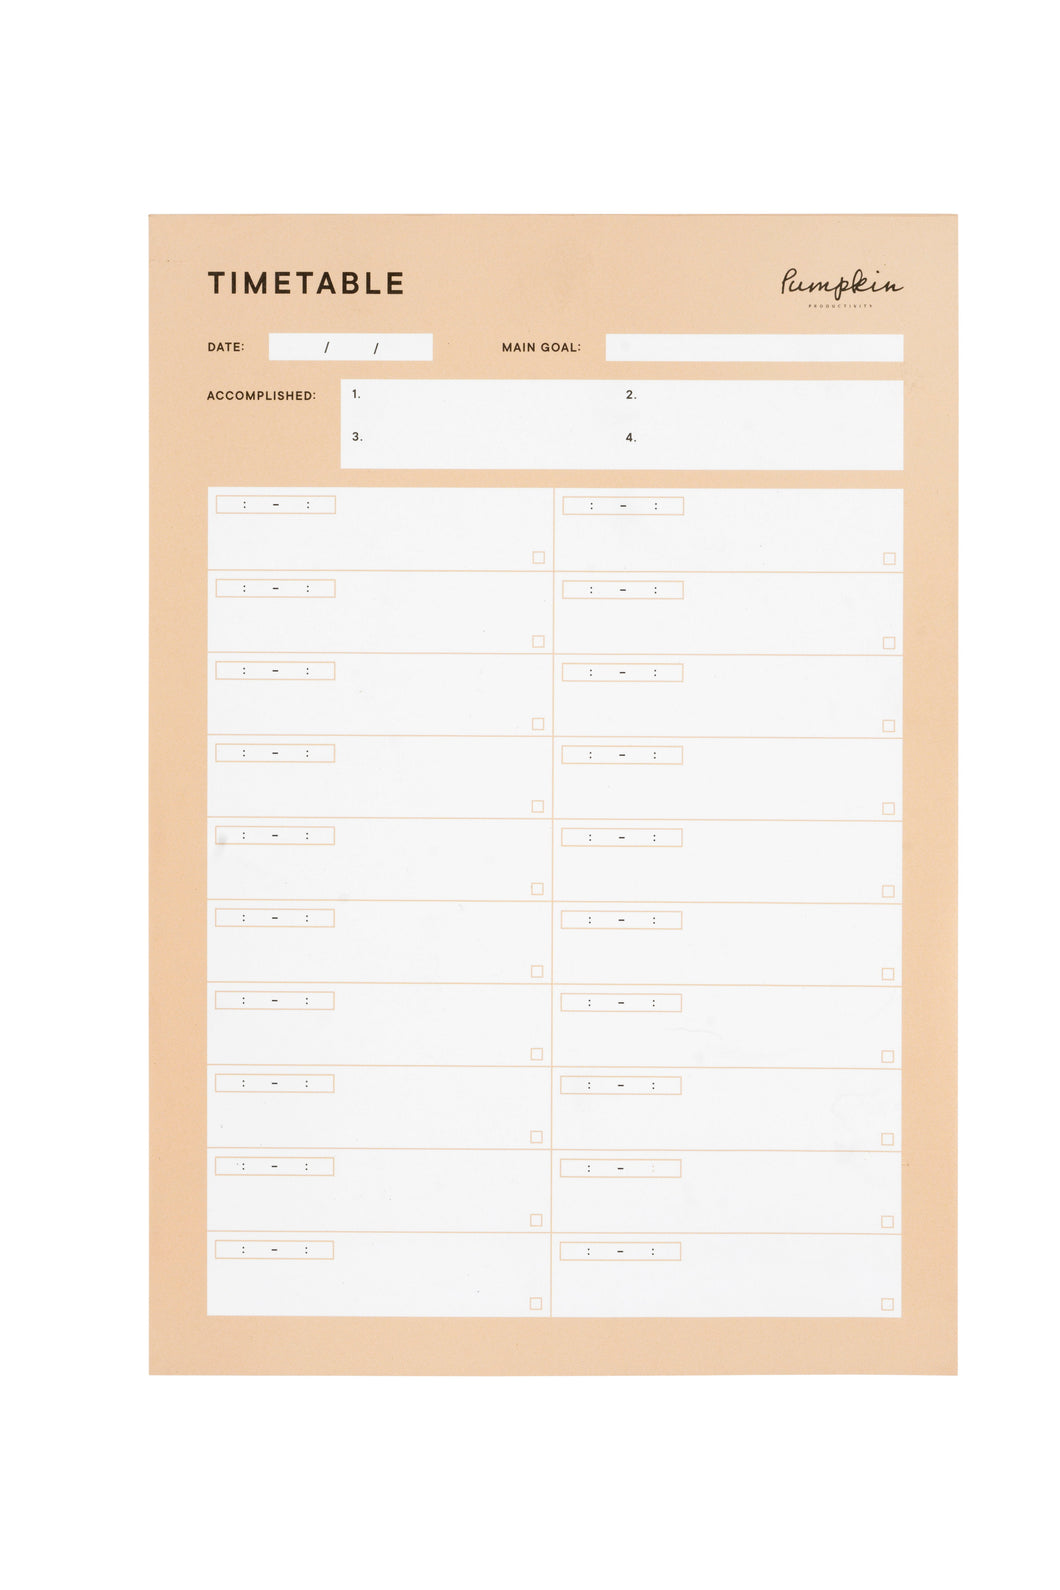 The Daily Timetable